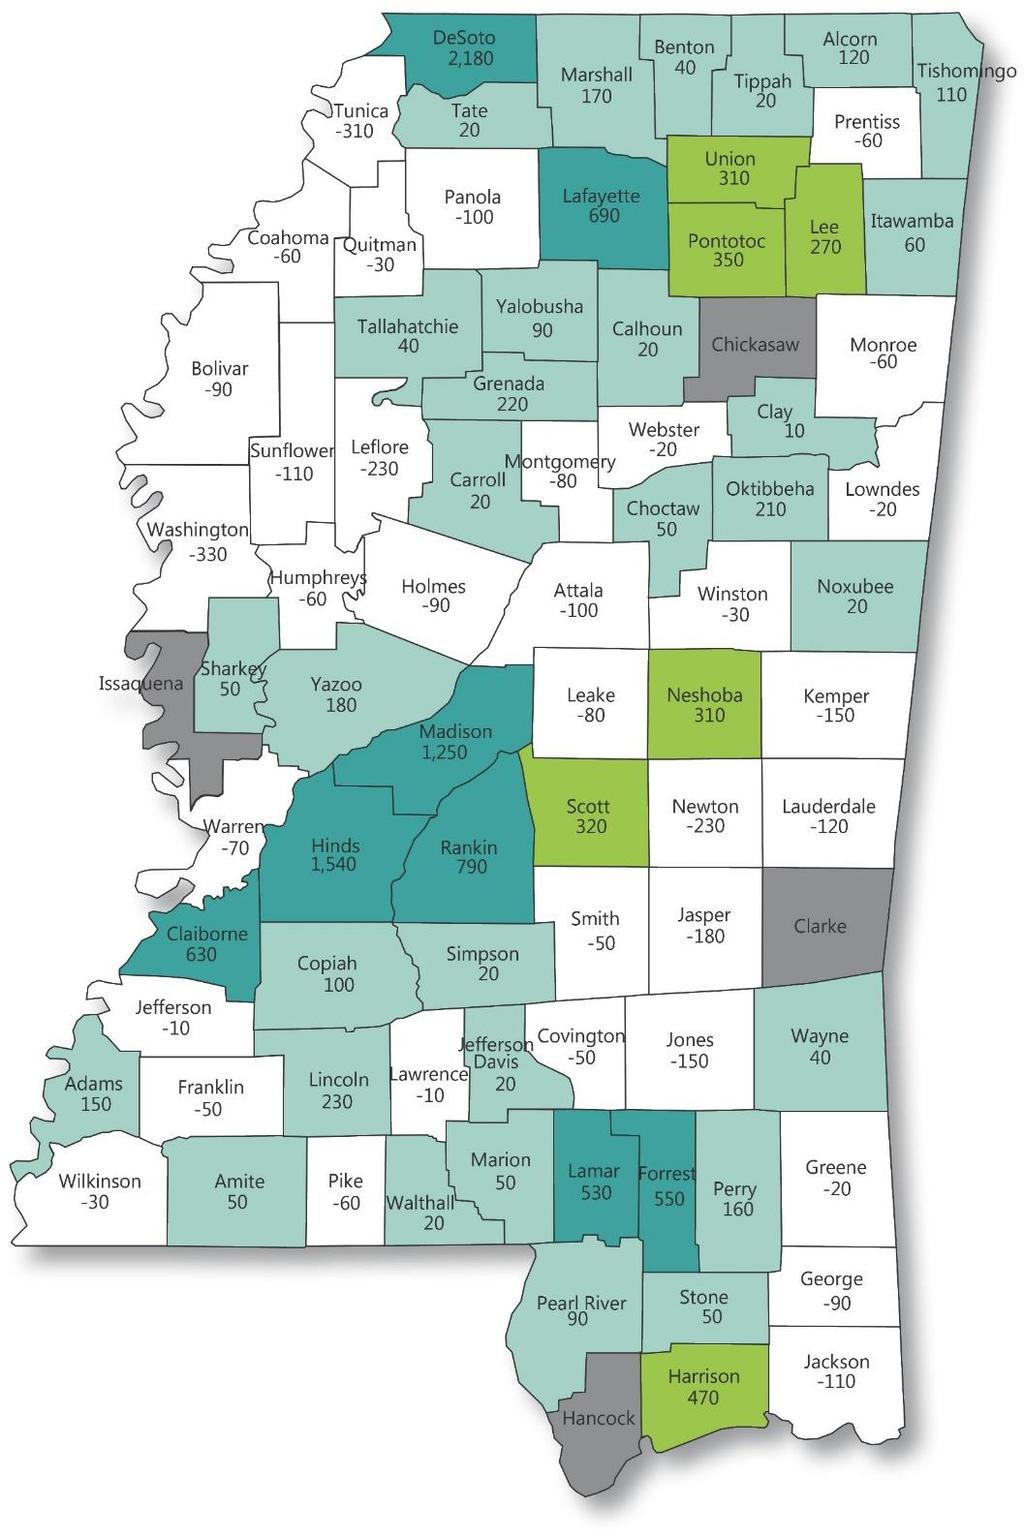 Where are the Job by County?